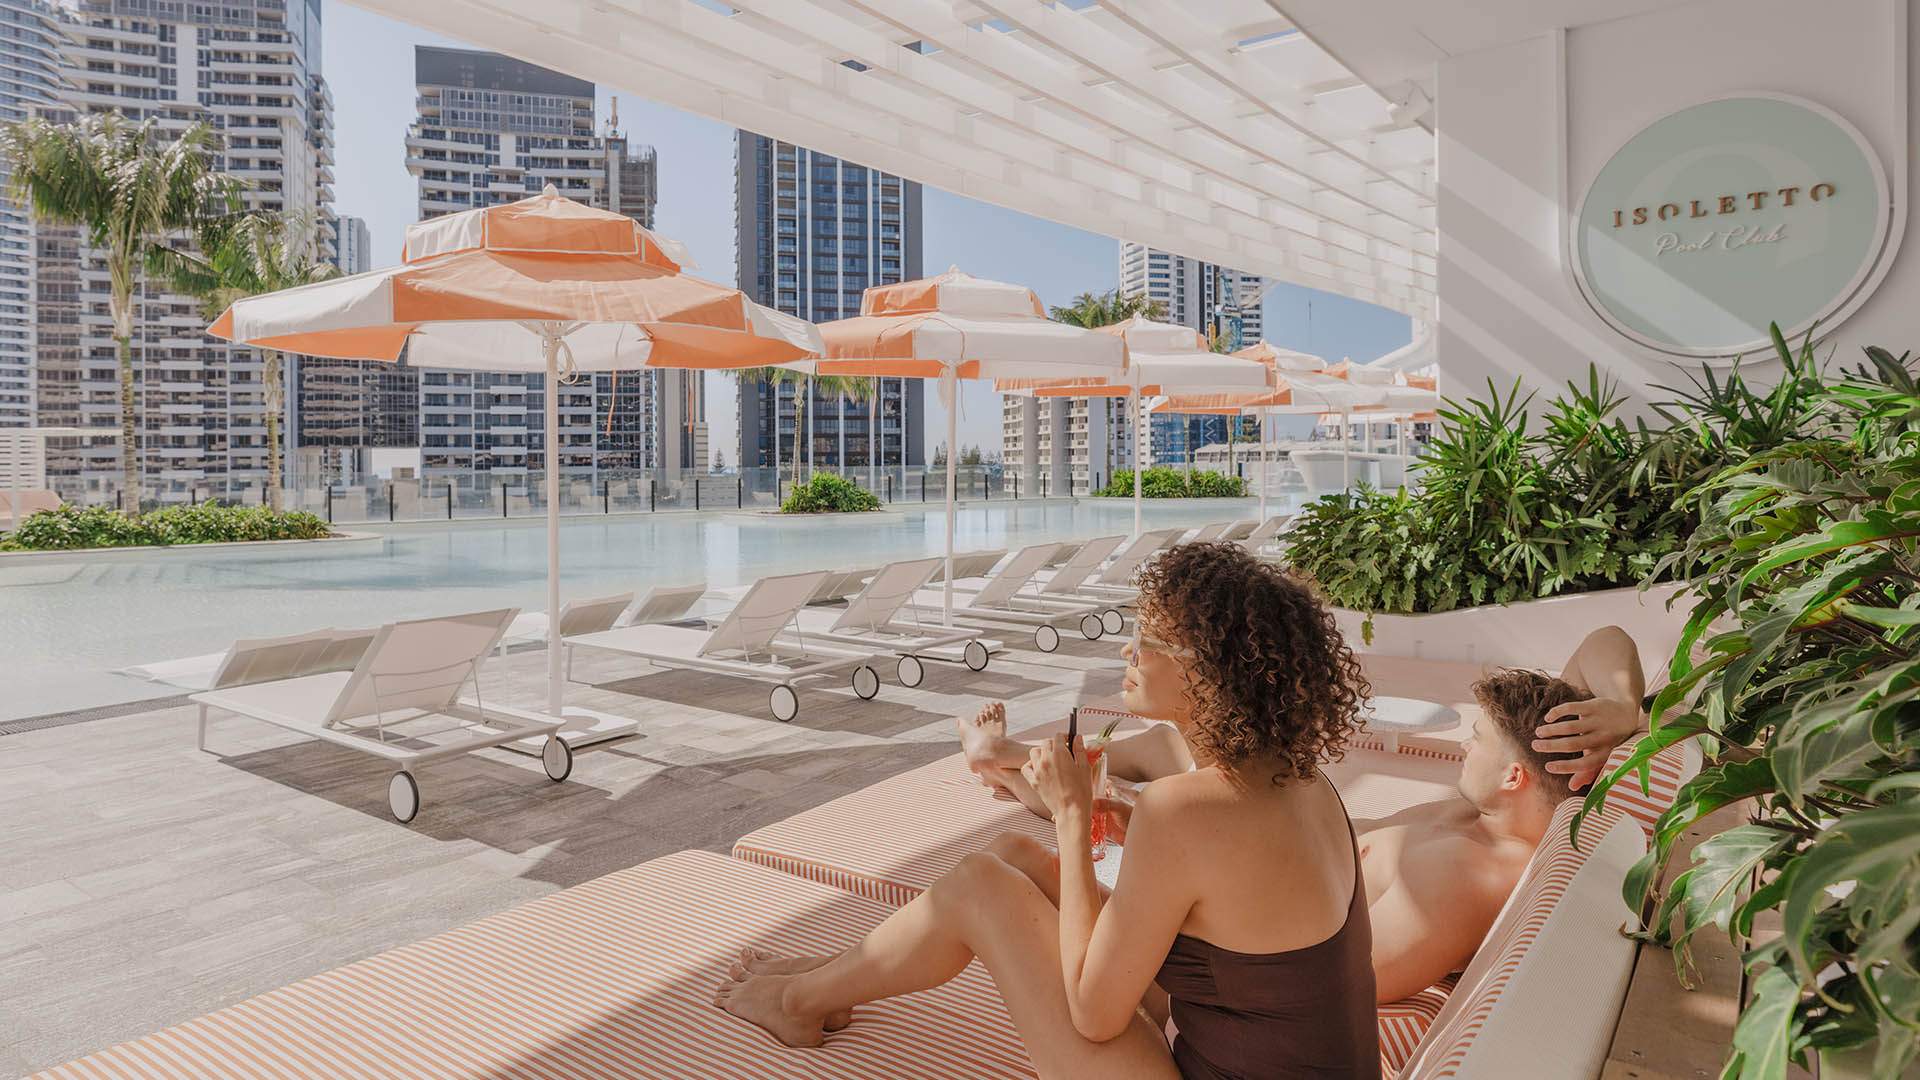 Now Open: Isoletto Is The Star Gold Coast's New Sky-High Pool Club and Party Deck with Scenic Views